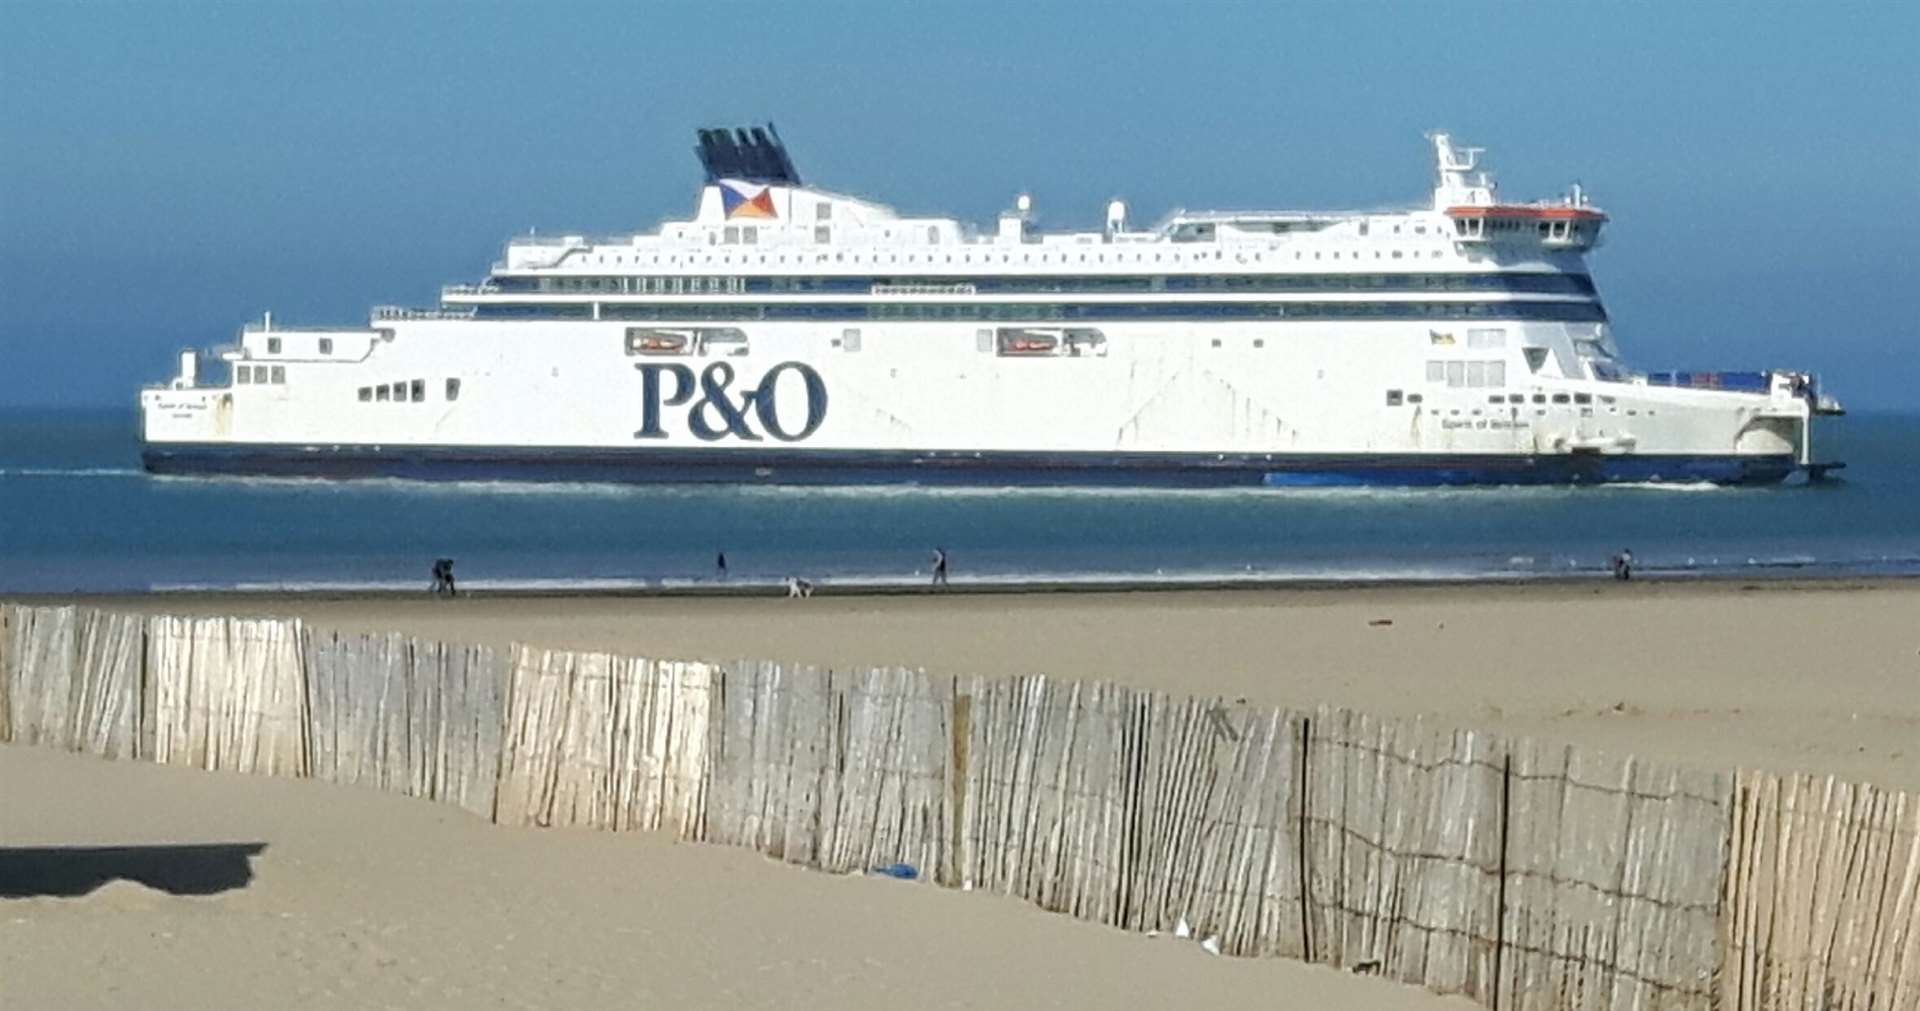 The legal action is being pursued against P&O Ferries. Library image KMG